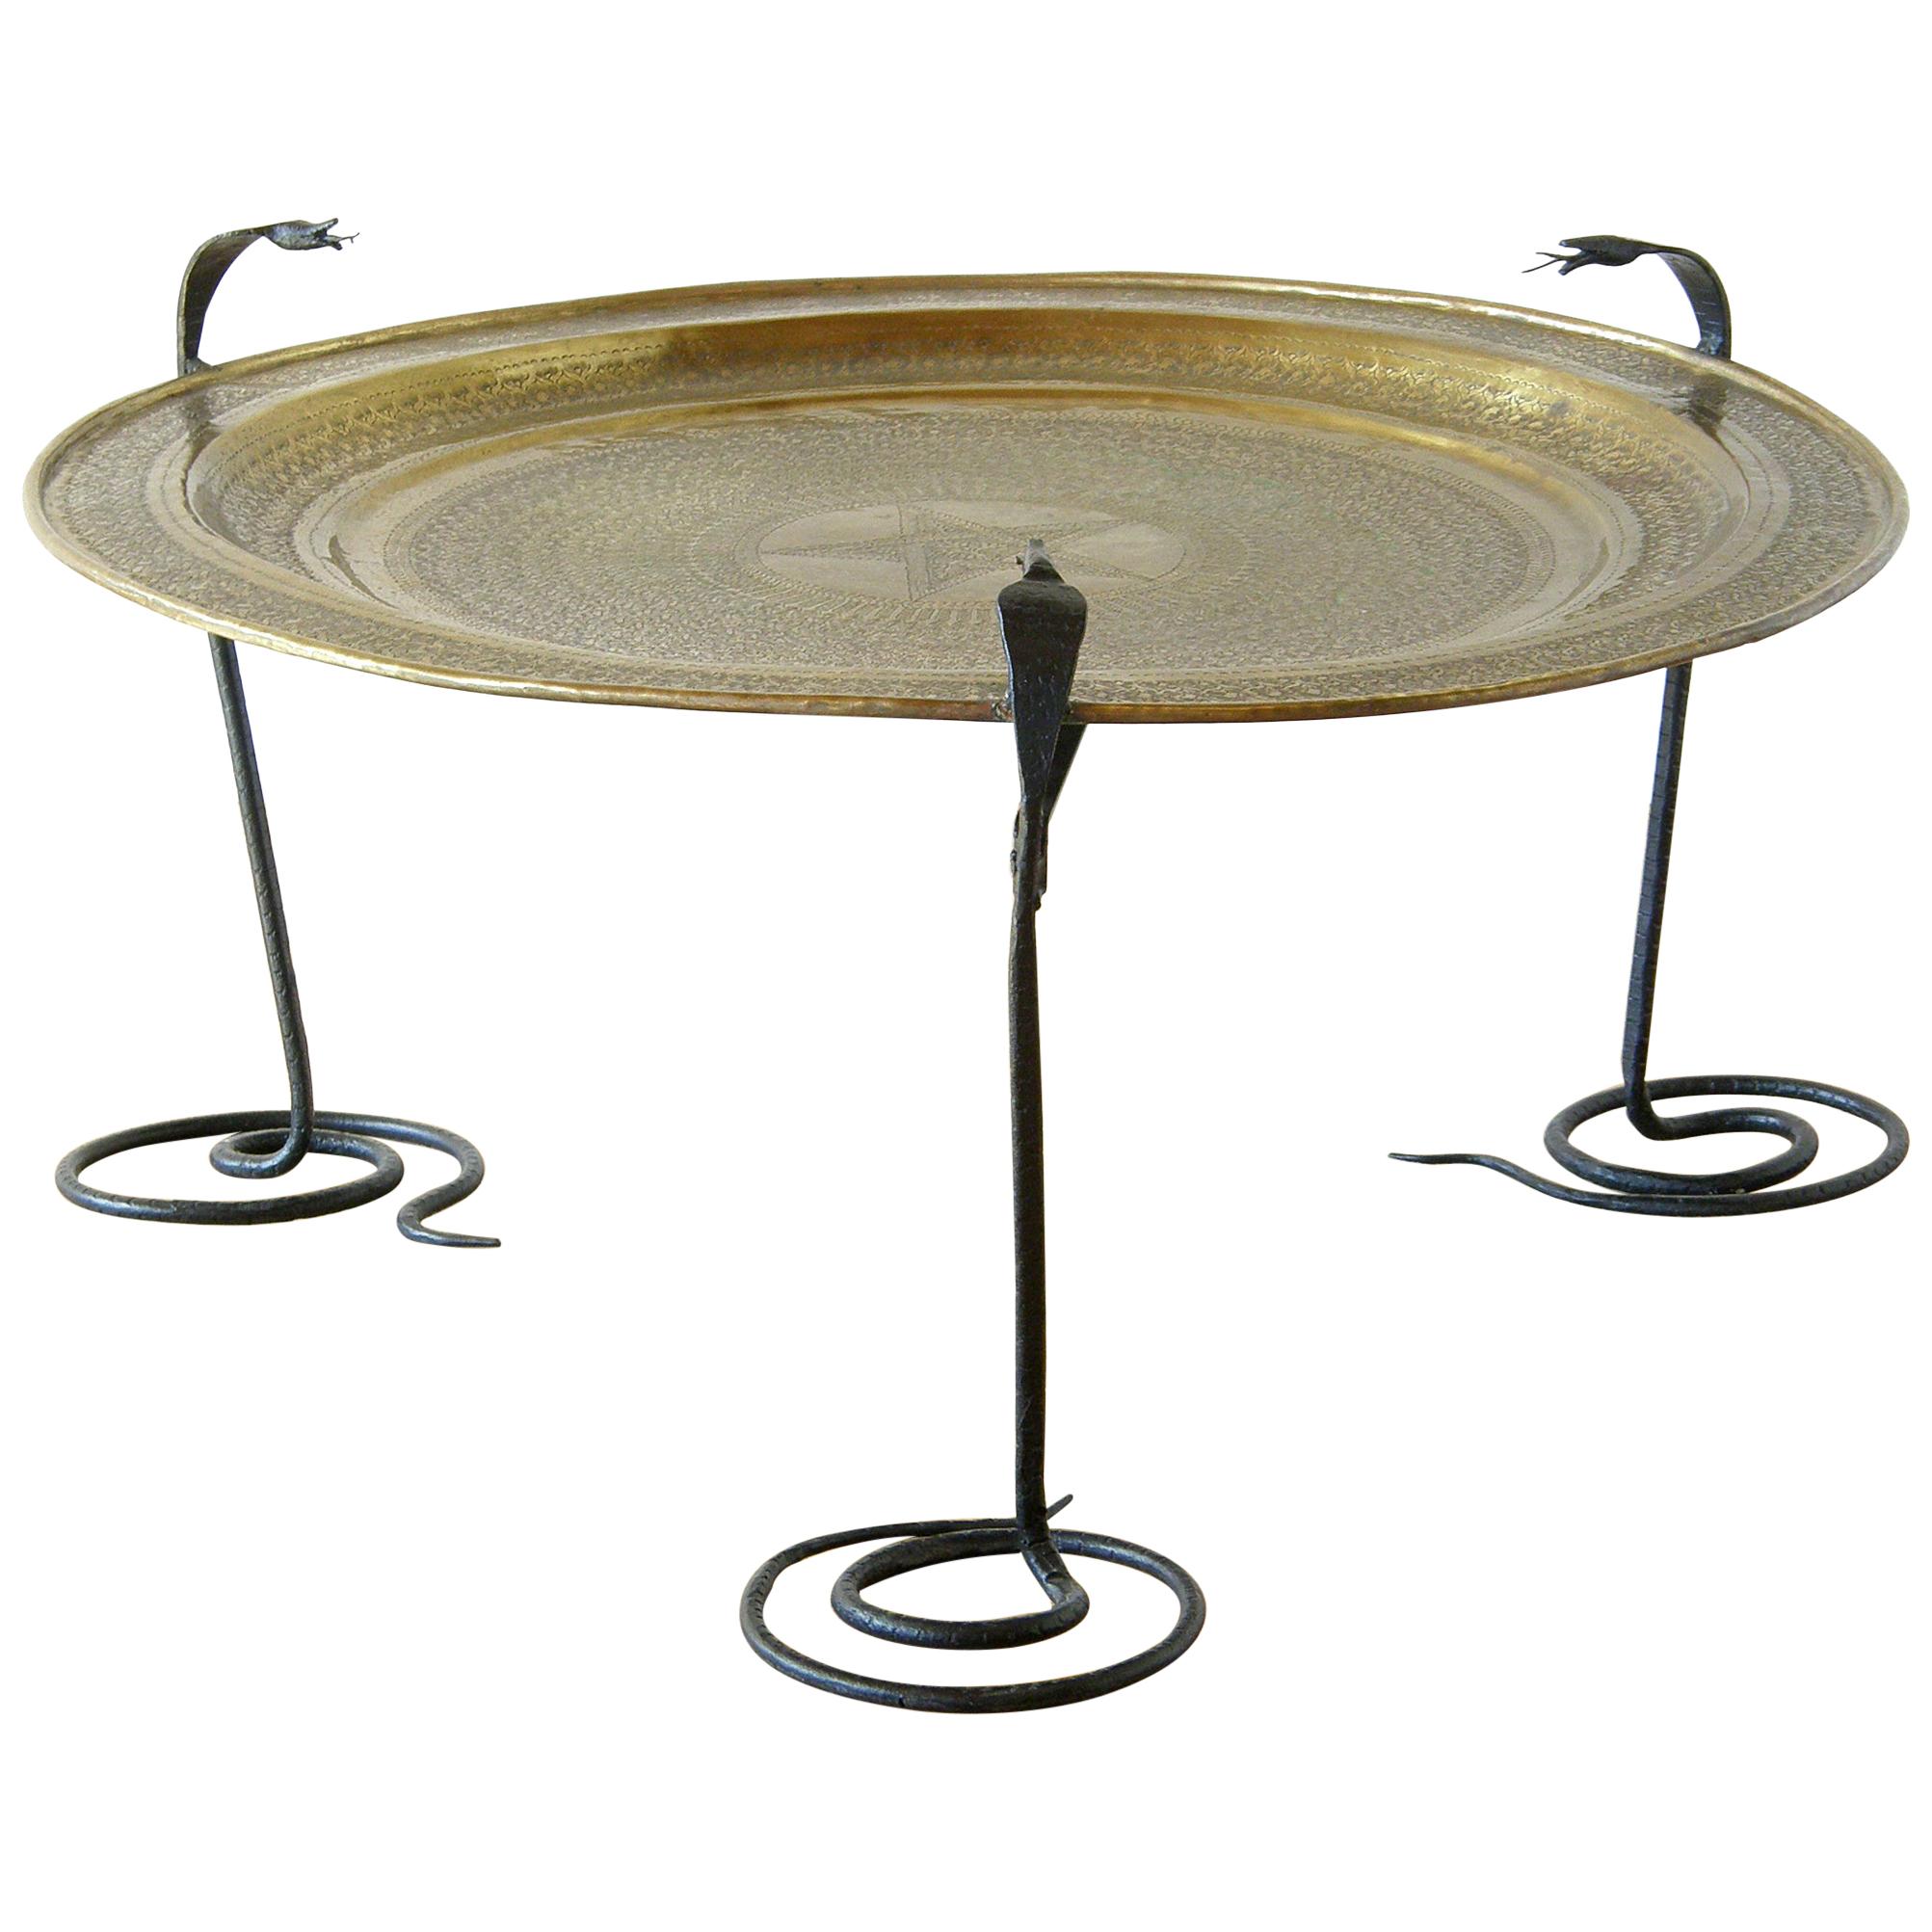 Wrought Iron Serpents Table with Hand Tooled Star Pattern on Brass Top